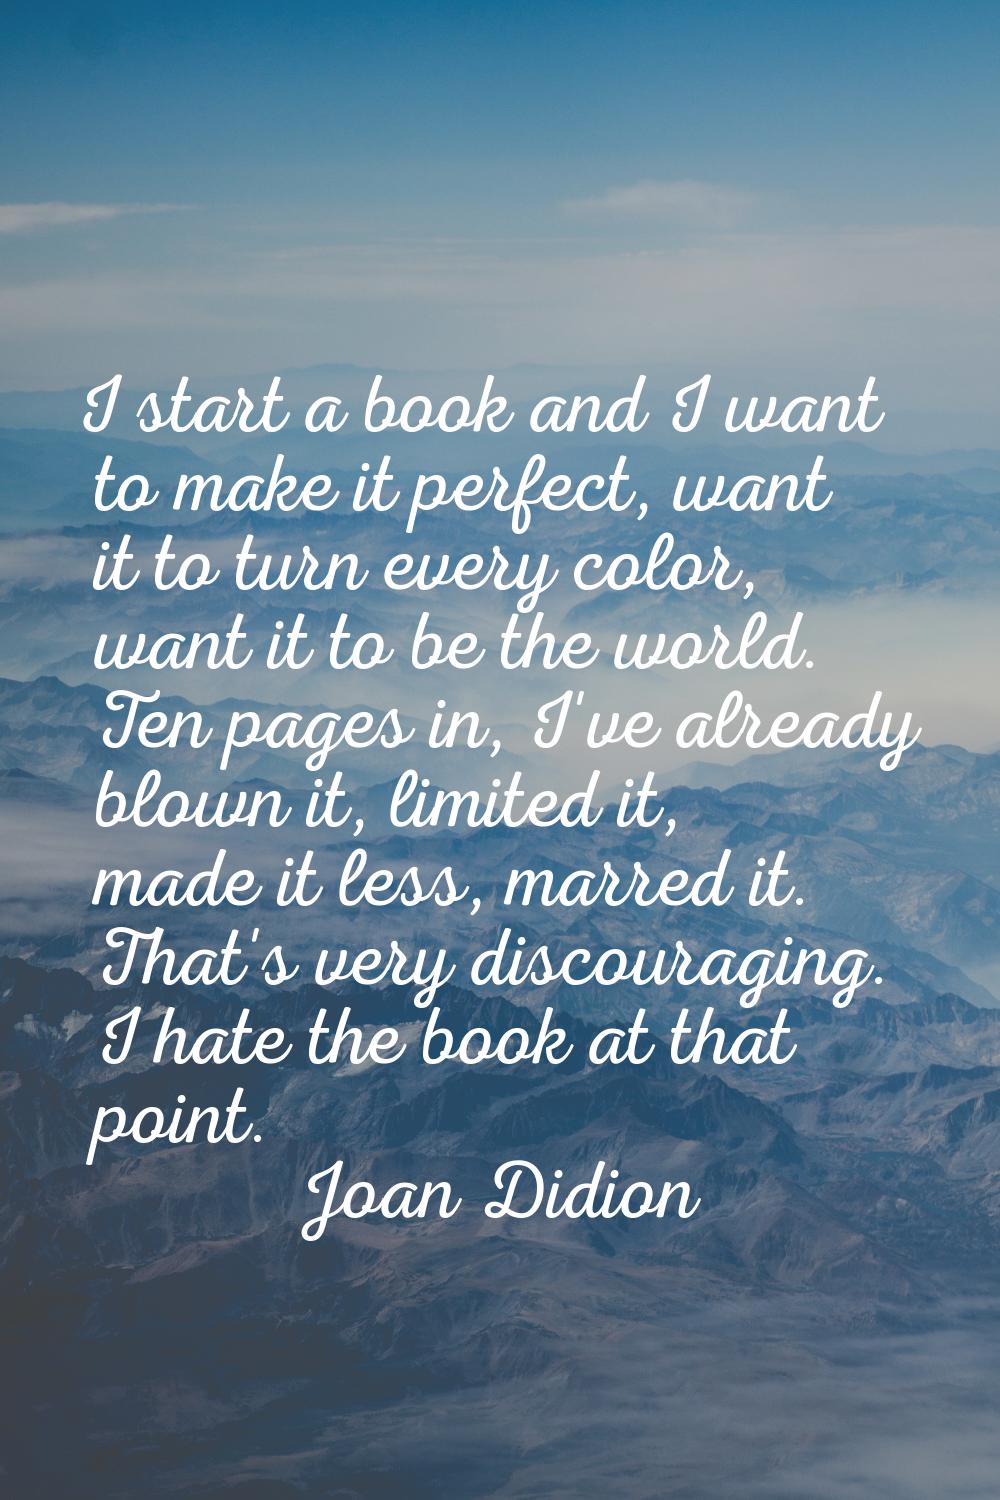 I start a book and I want to make it perfect, want it to turn every color, want it to be the world.